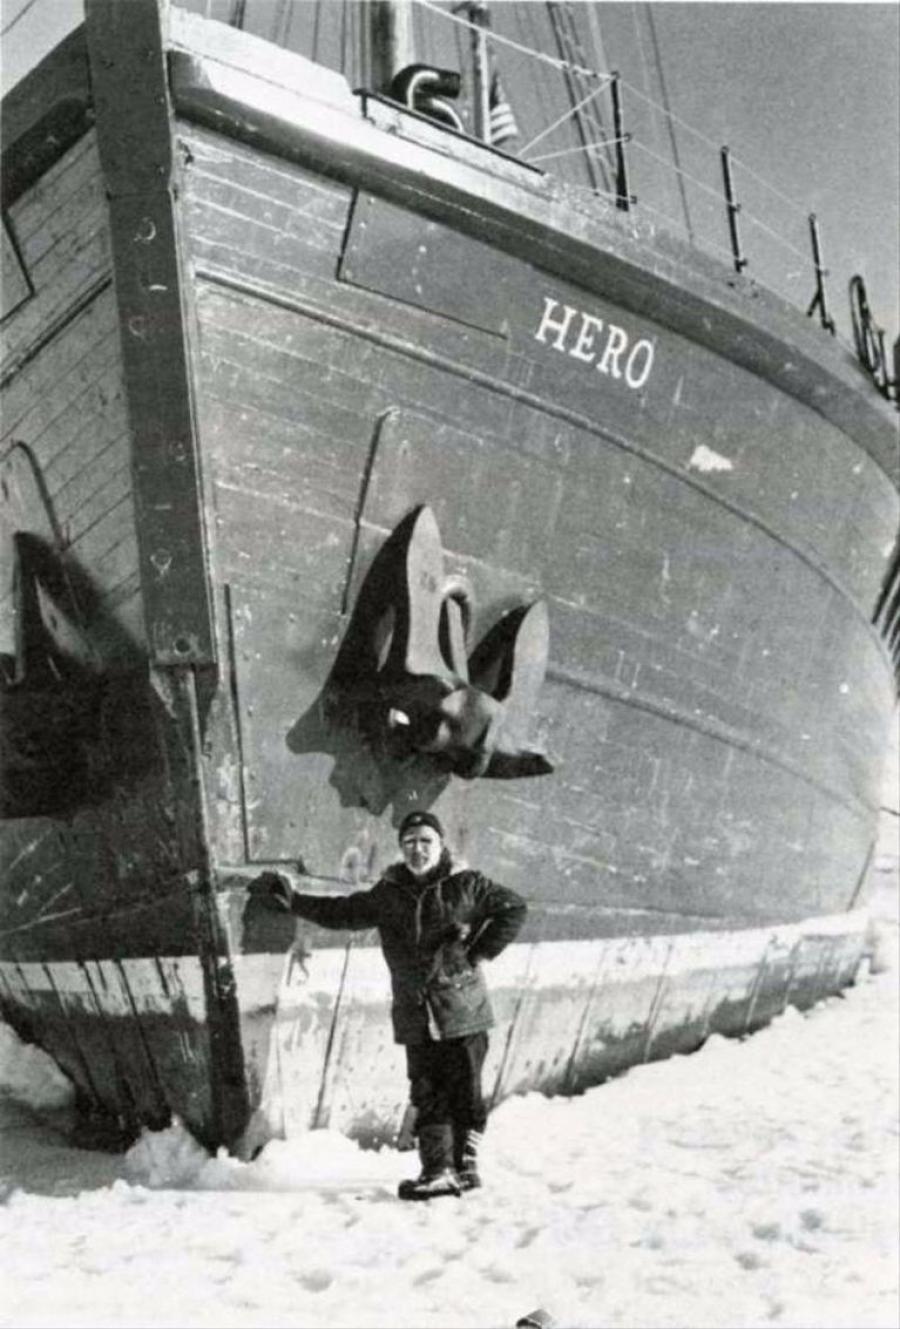 Captain Pieter Lenie poses with the boat in particularly icy conditions in December 1977. (Miguel L. Brand-Wiener, Antarctic Journal. Courtesy of PalmerStation.com)